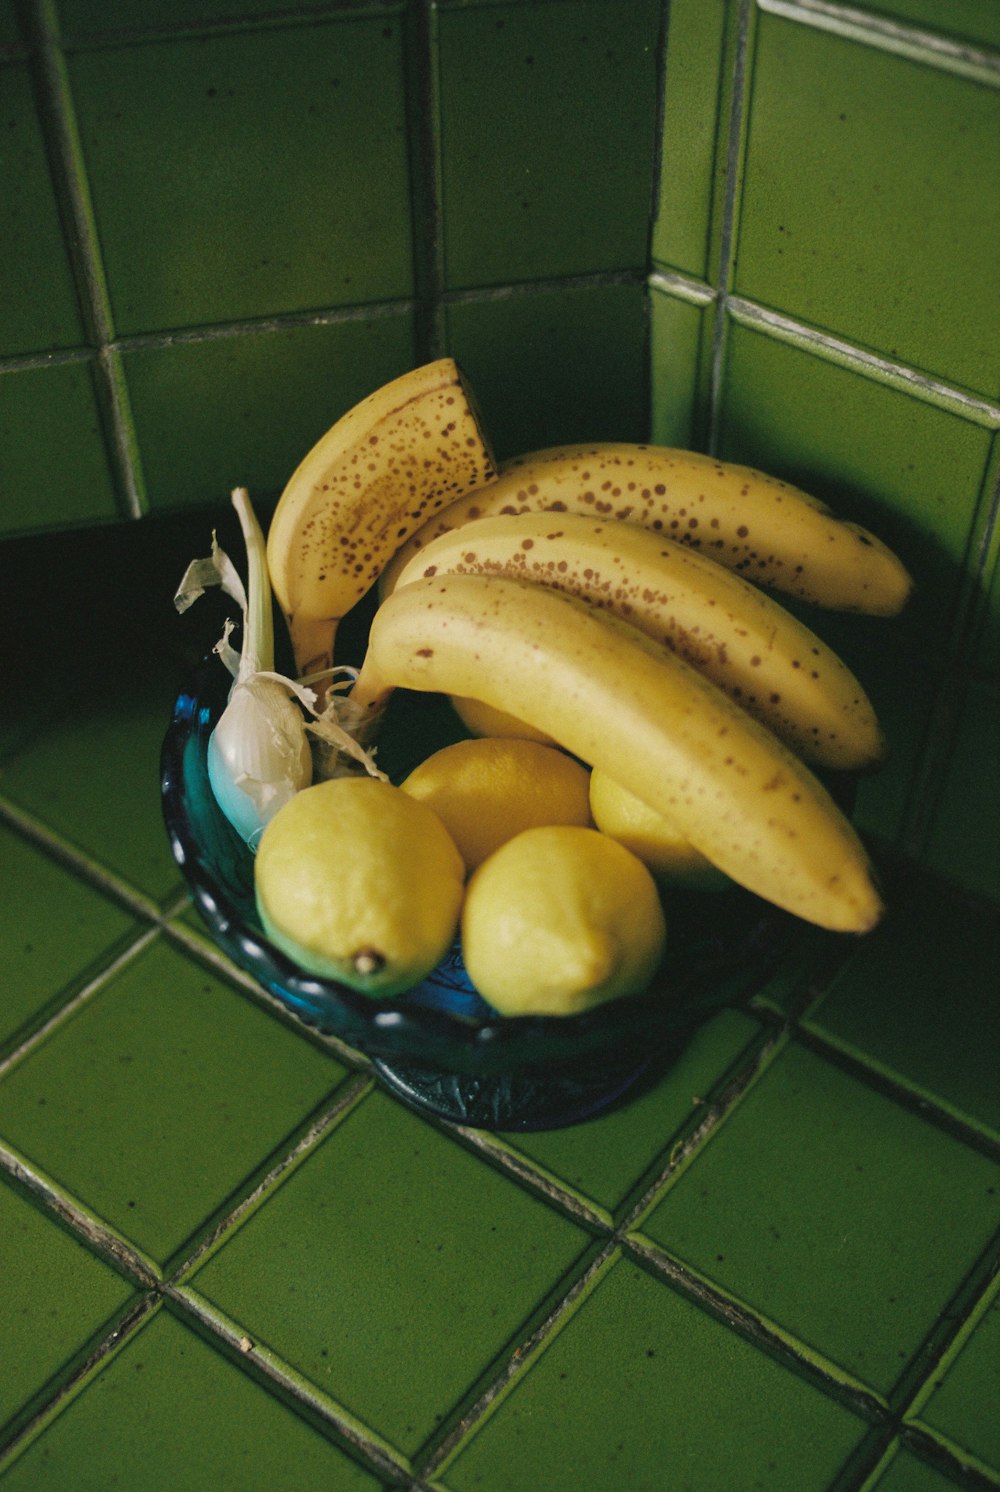 a bowl filled with bananas and lemons on a green tile floor